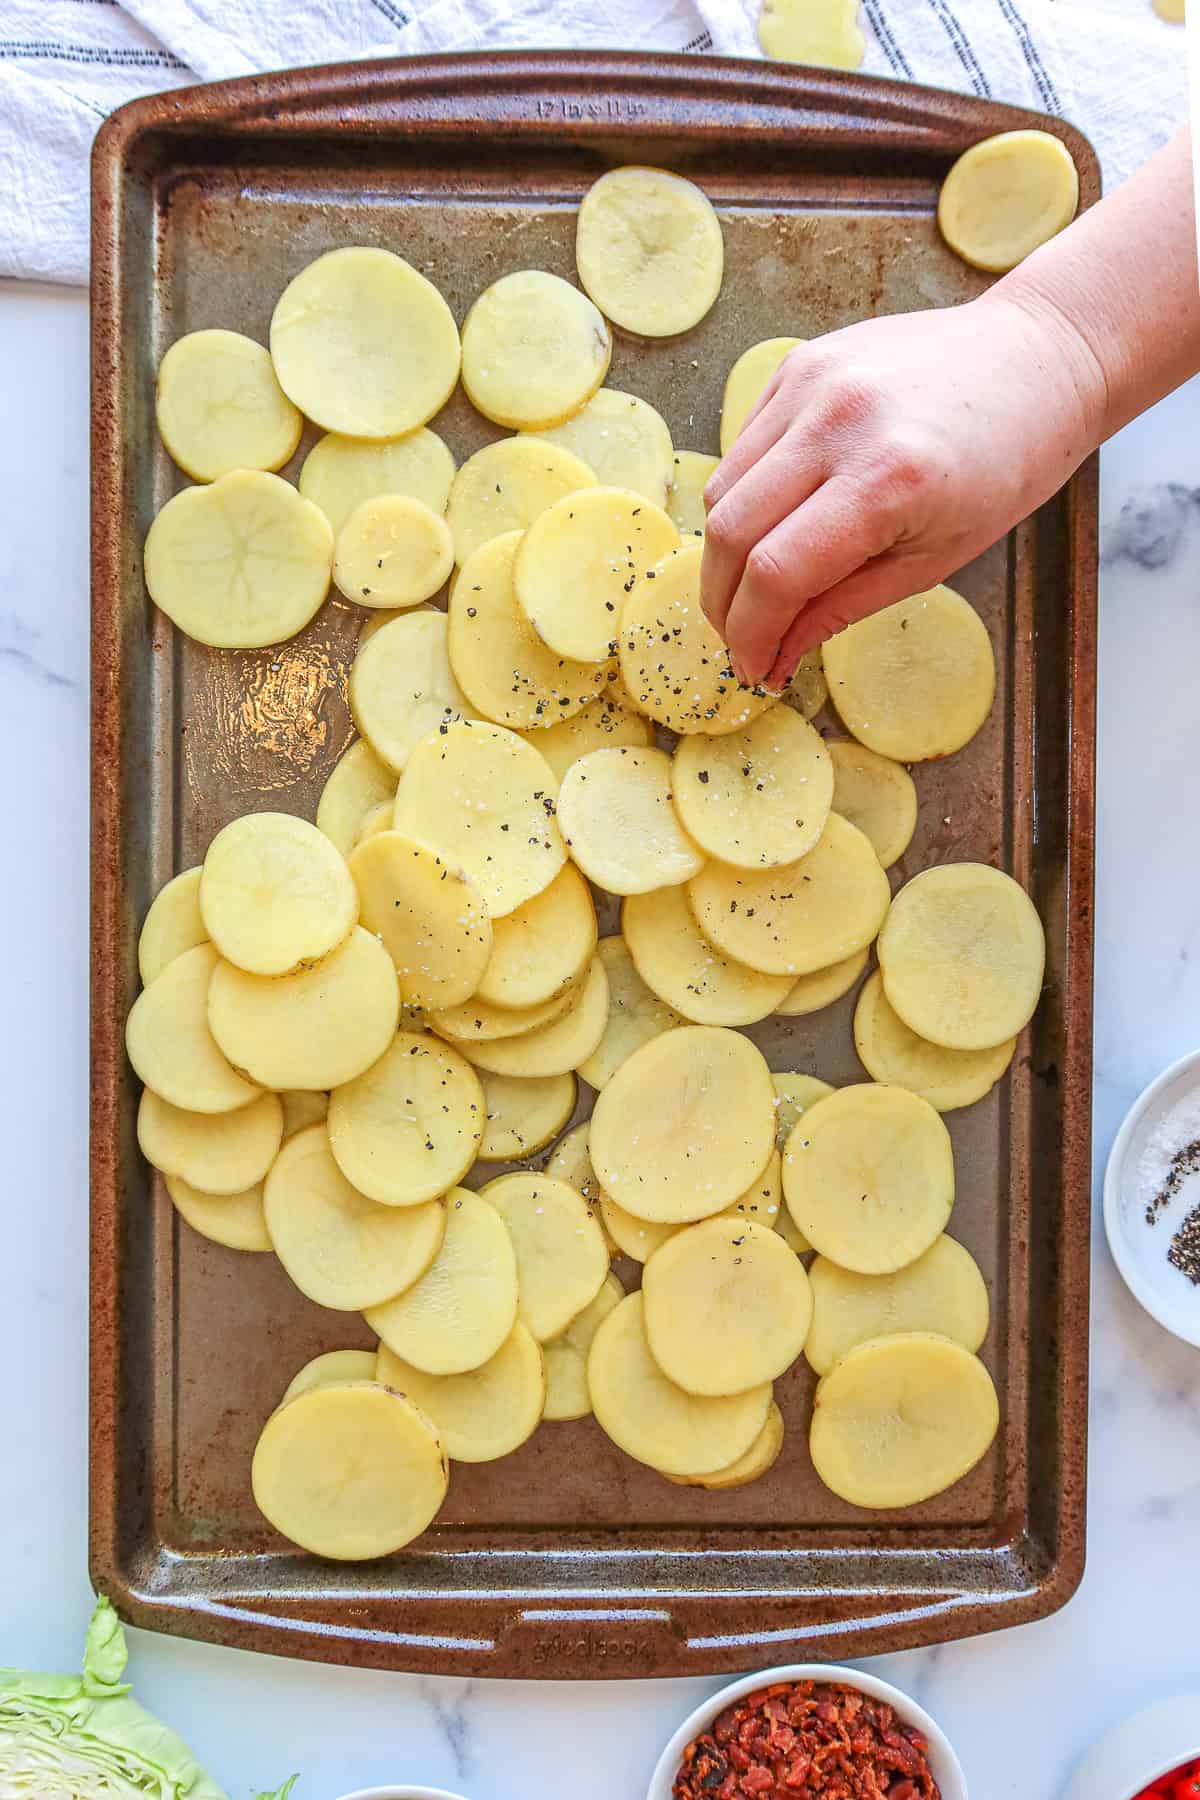 Sprinkling salt and pepper on potato slices atop a baking sheet.